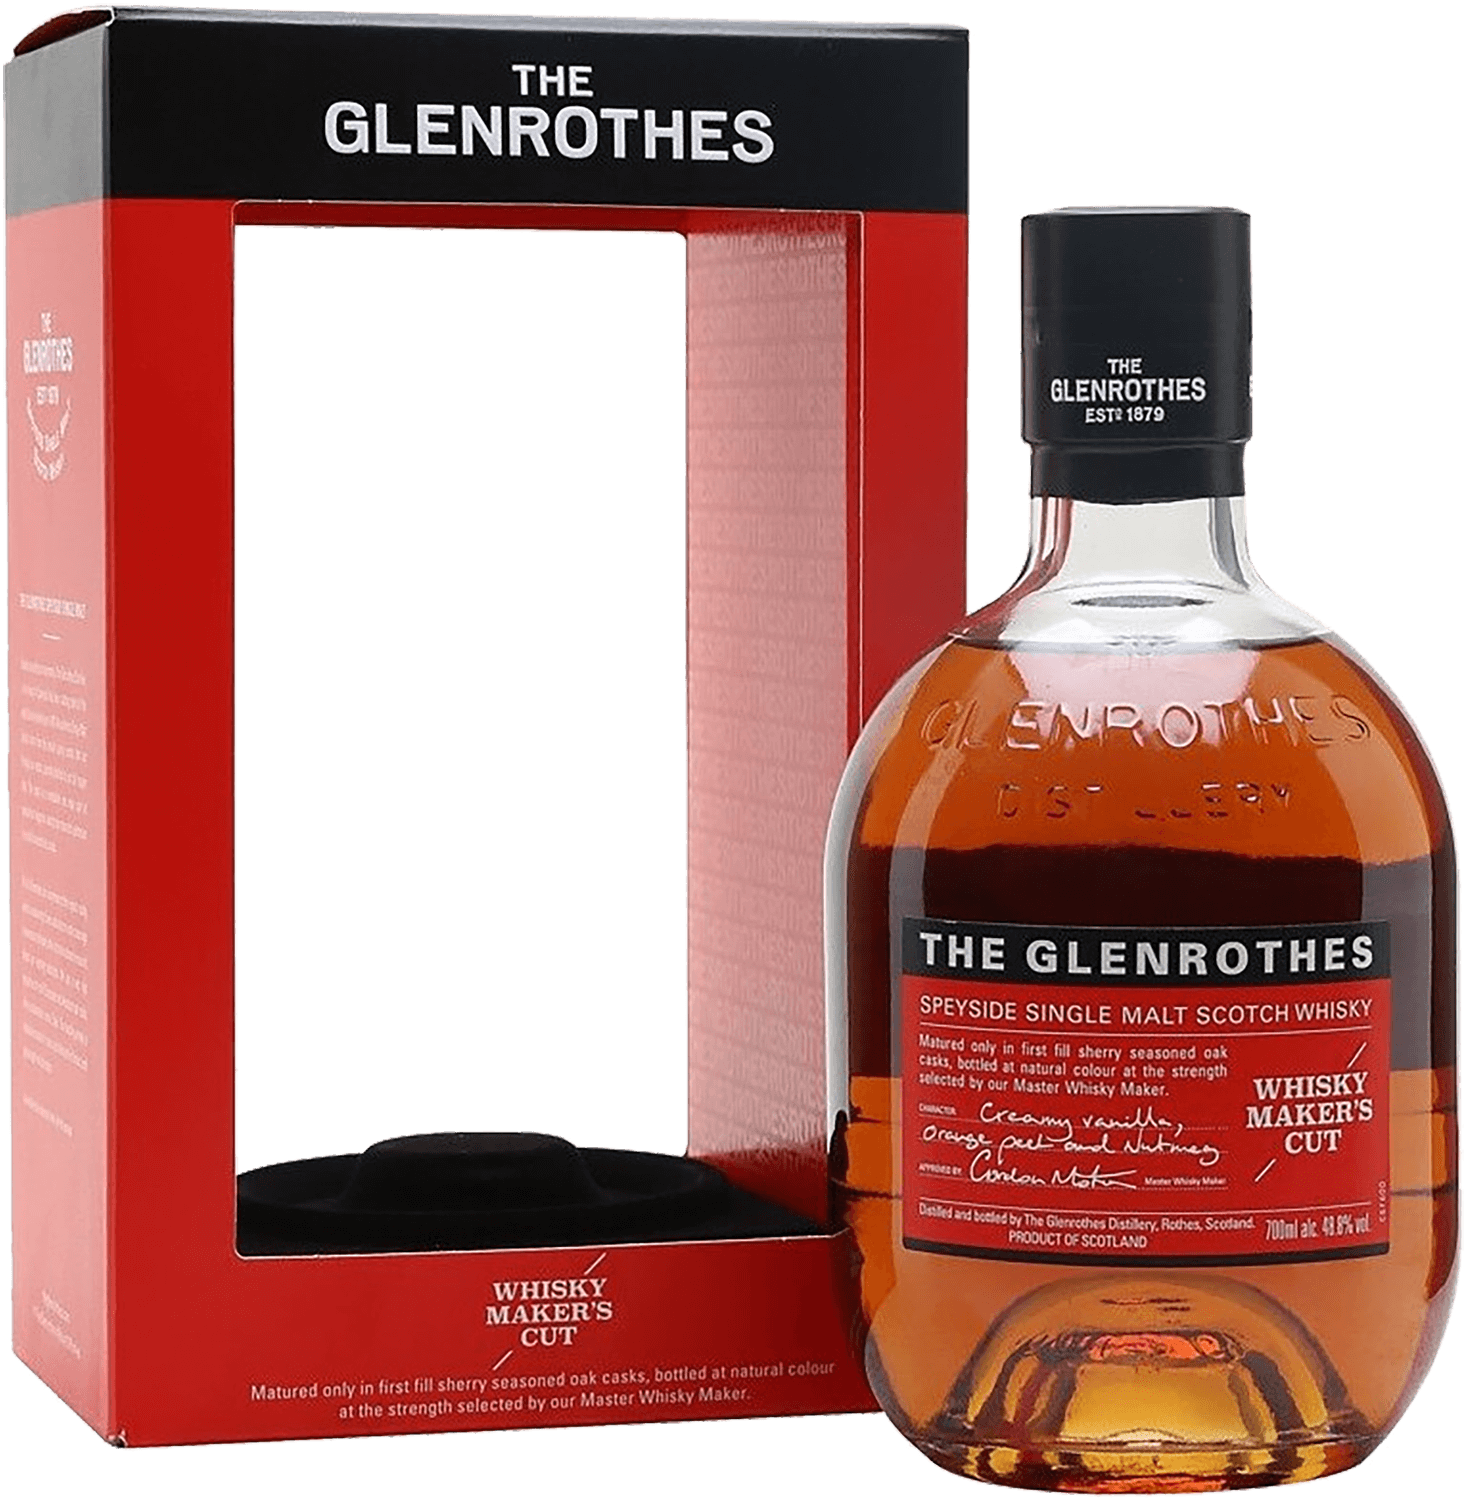 The Glenrothes Whisky Maker's Cut Speyside Single Malt Scotch Whisky (gift box) cragganmore speyside 12 y o single malt scotch whisky gift box